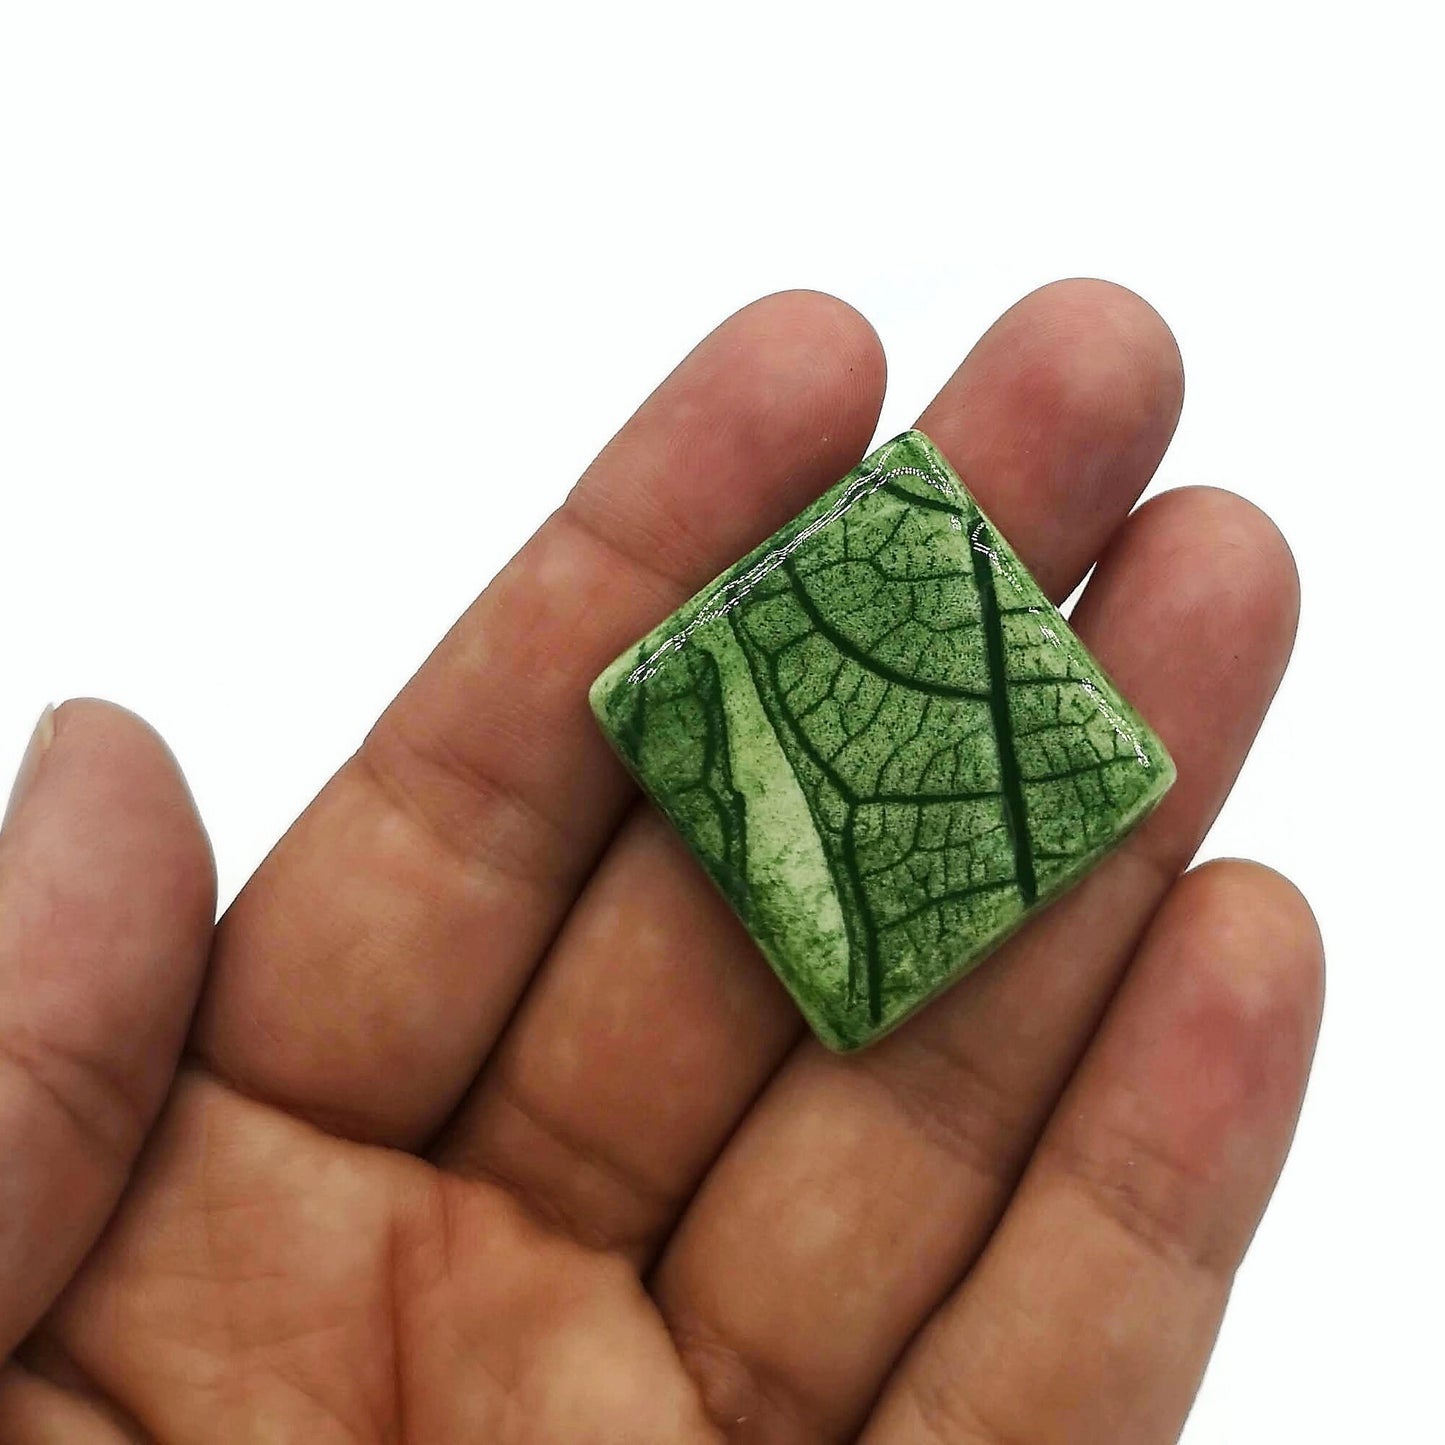 SMALL BROOCH, PLANT Lovers Gift, Handmade Ceramic Brooches For Women, Unique Elegant Mothers Day Gift - Ceramica Ana Rafael